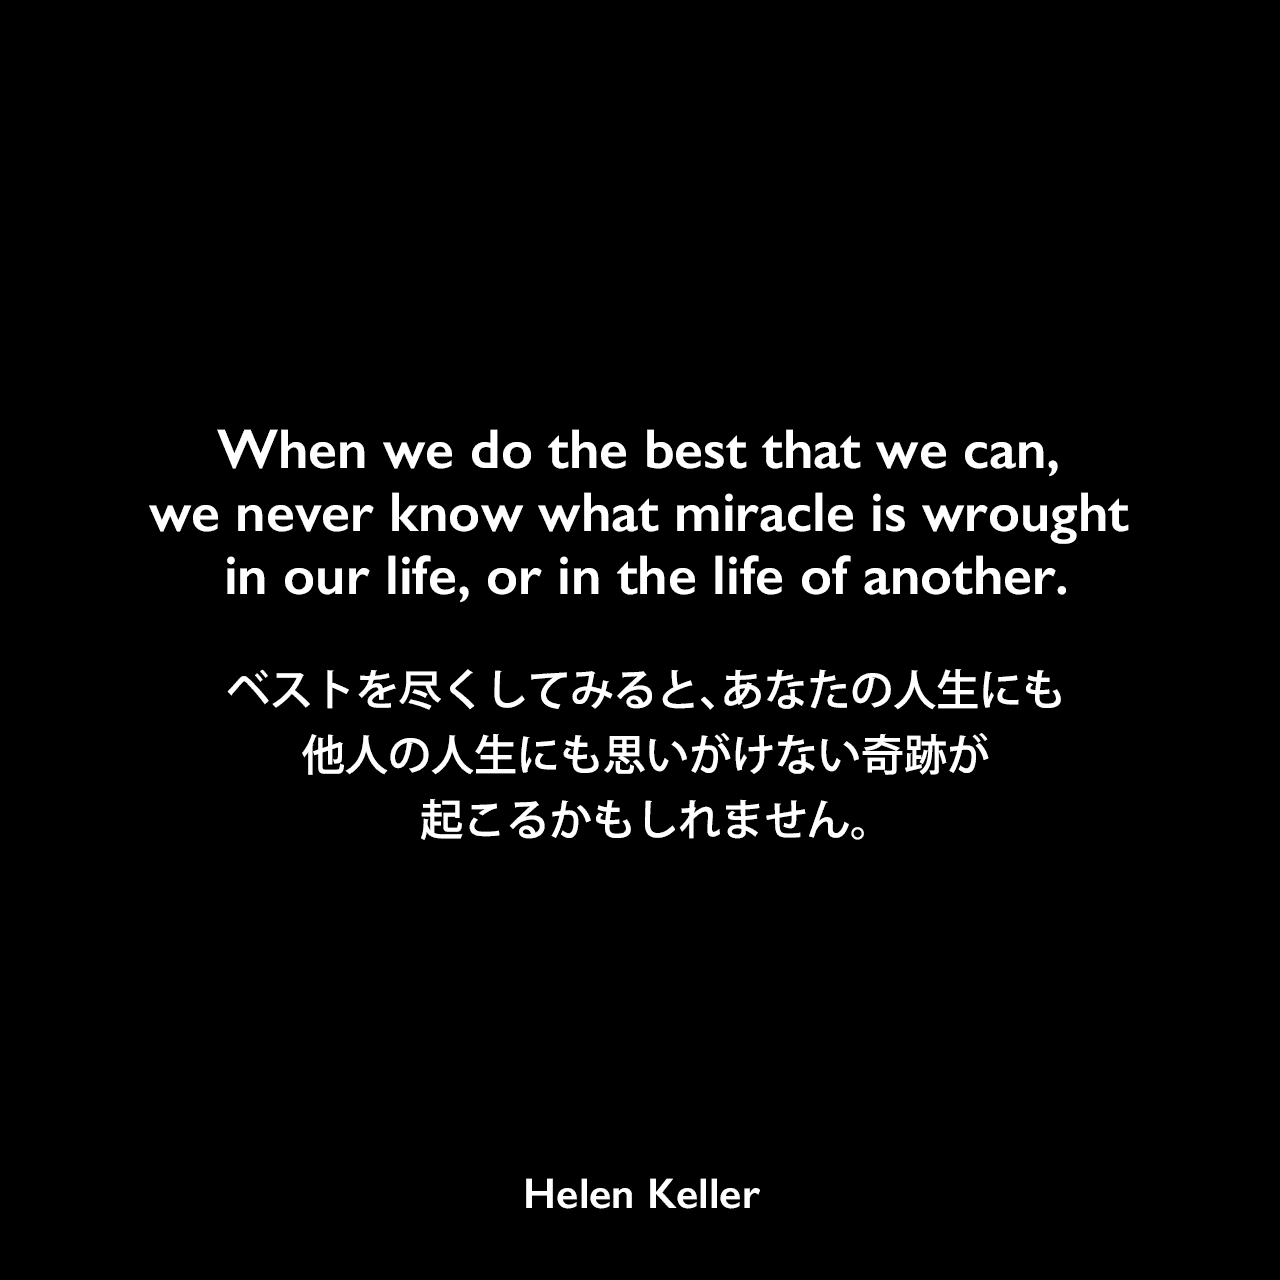 When we do the best that we can, we never know what miracle is wrought in our life, or in the life of another.ベストを尽くしてみると、あなたの人生にも他人の人生にも思いがけない奇跡が起こるかもしれません。Helen Keller